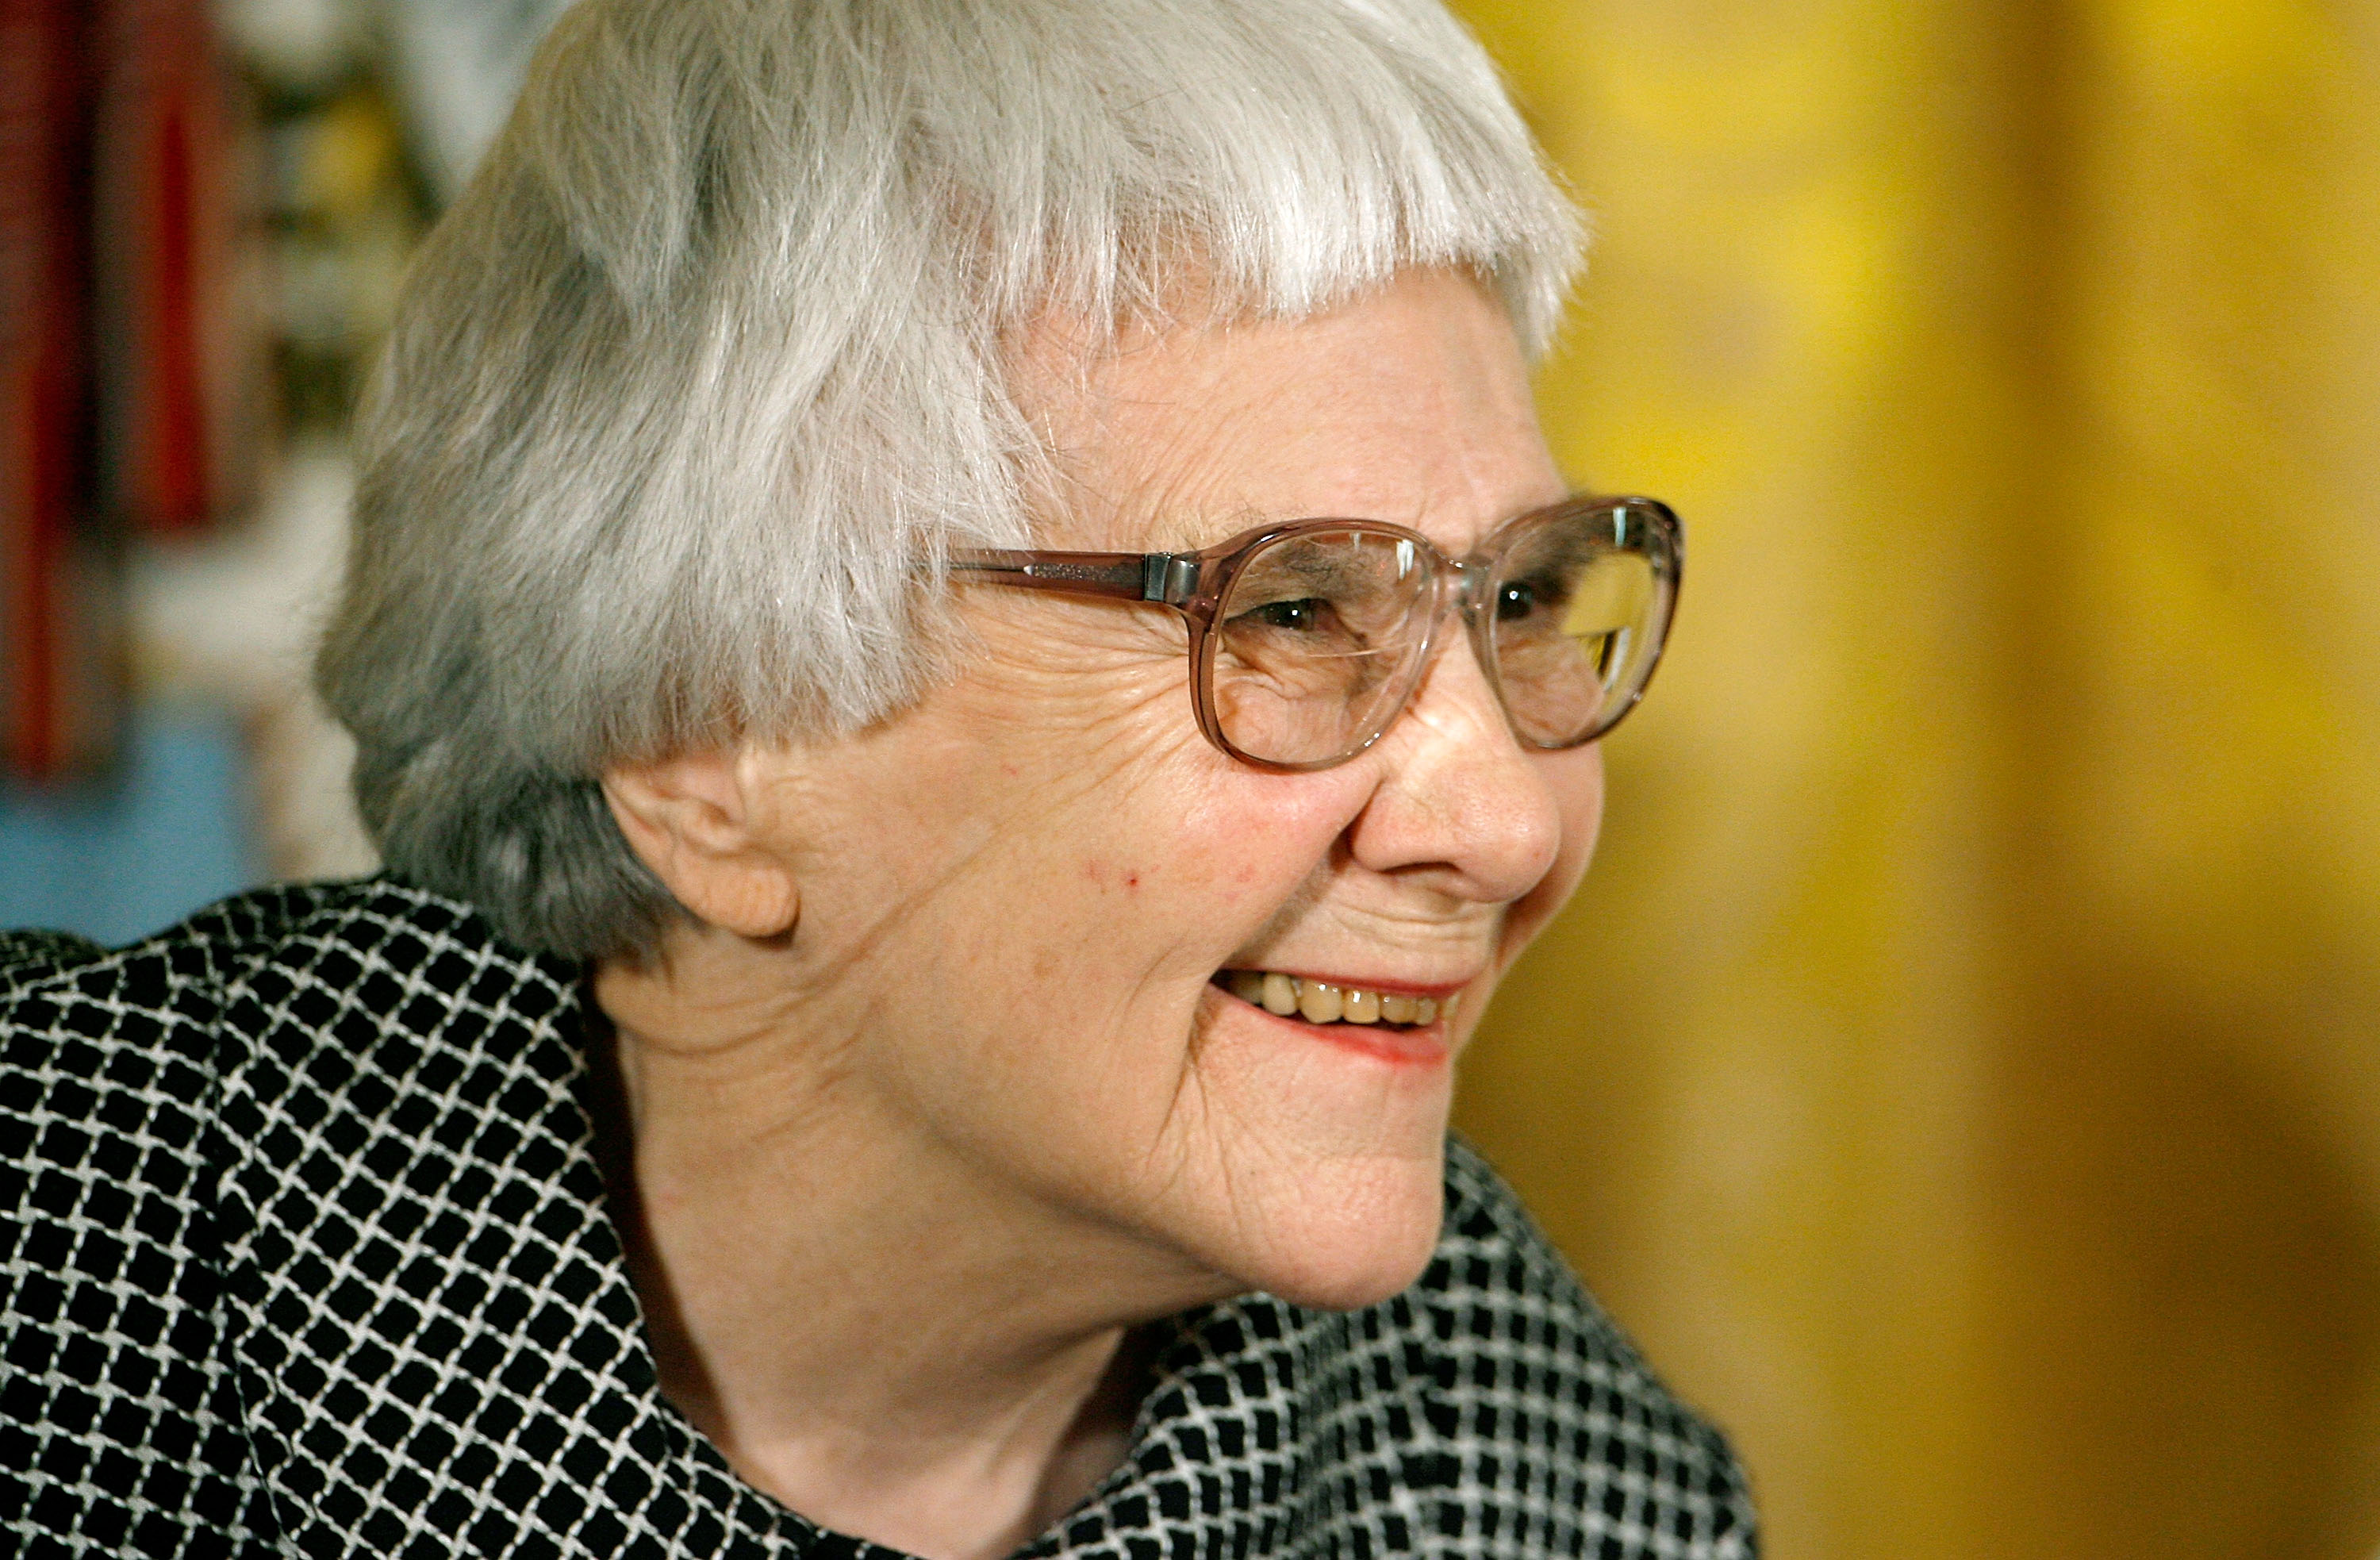 Pulitzer Prize winner and <i>To Kill a Mockingbird</i> author Harper Lee smiles before receiving the 2007 Presidential Medal of Freedom in the East Room of the White House, in Washington, on Nov. 5, 2007 (Chip Somodevilla—Getty Images)